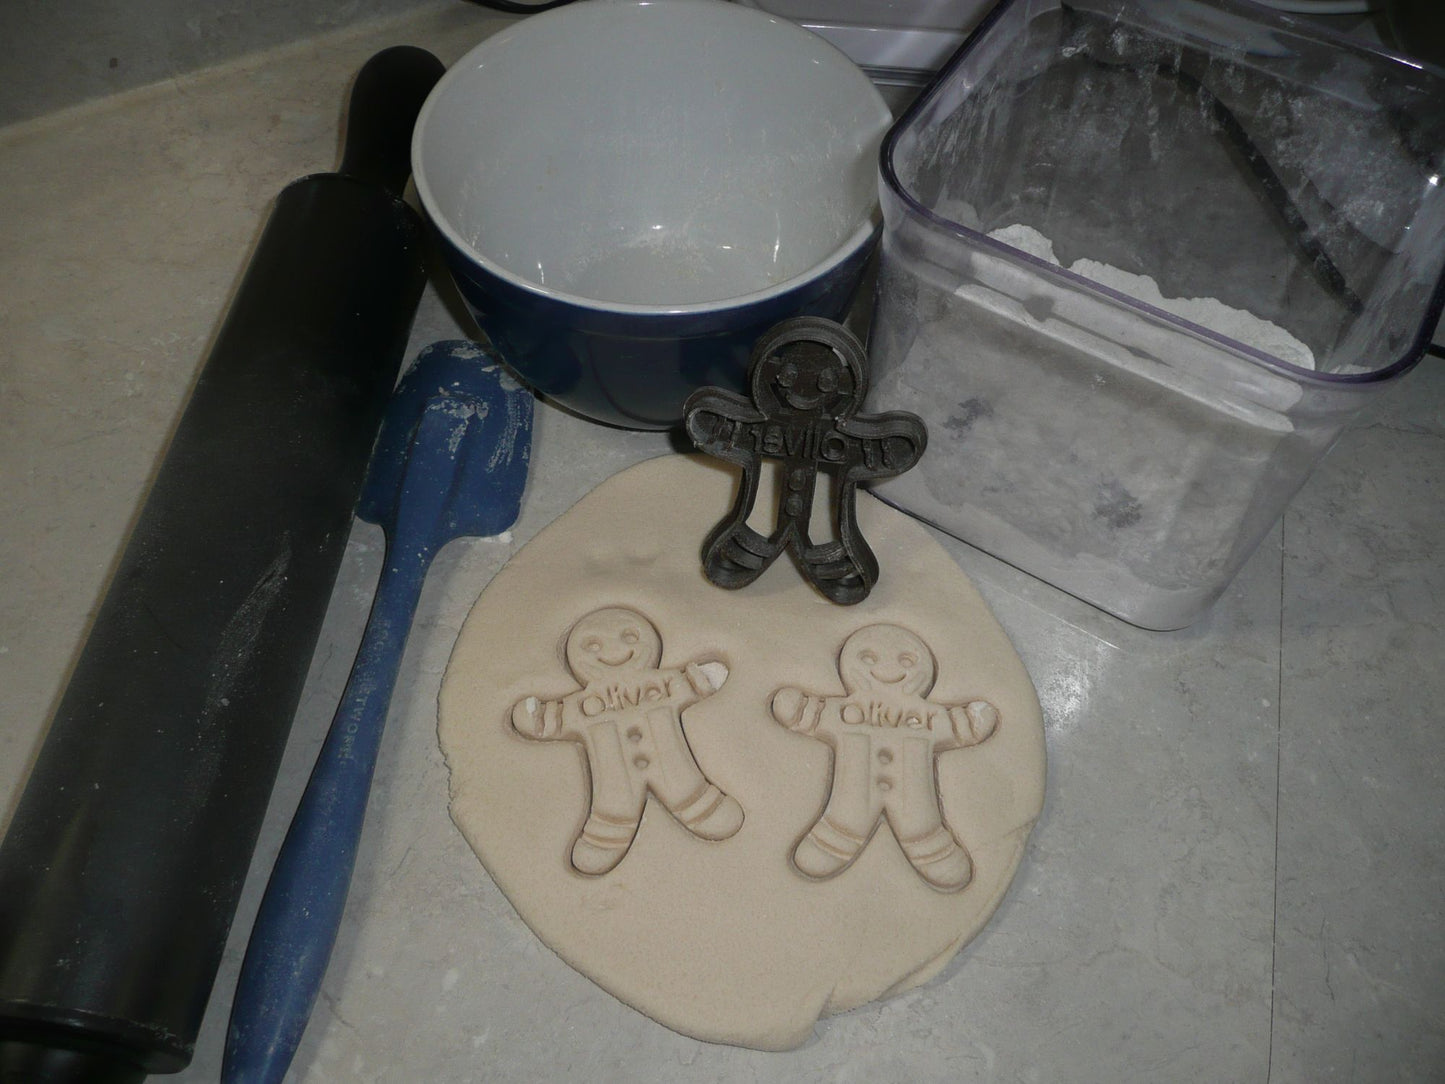 Gingerbread Man Personalized Christmas Cookie Cutter USA PR2309